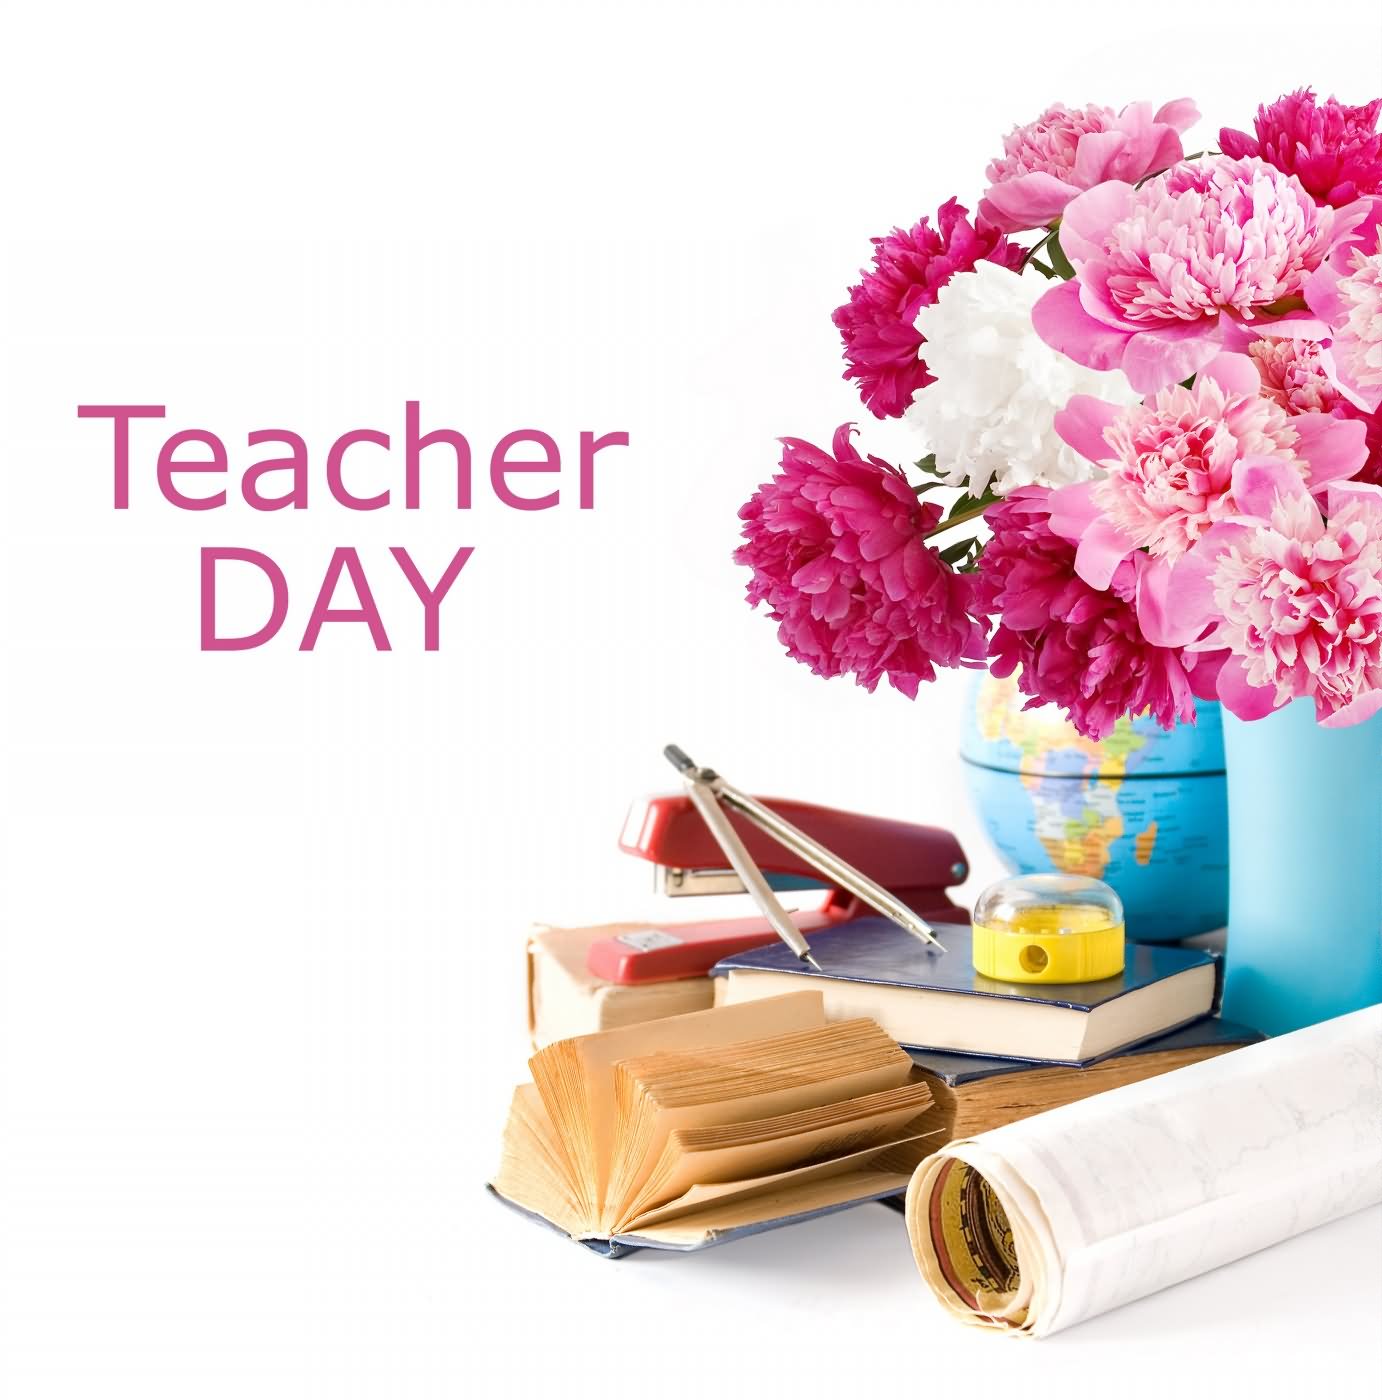 Teachers Day Wishes With Flowers